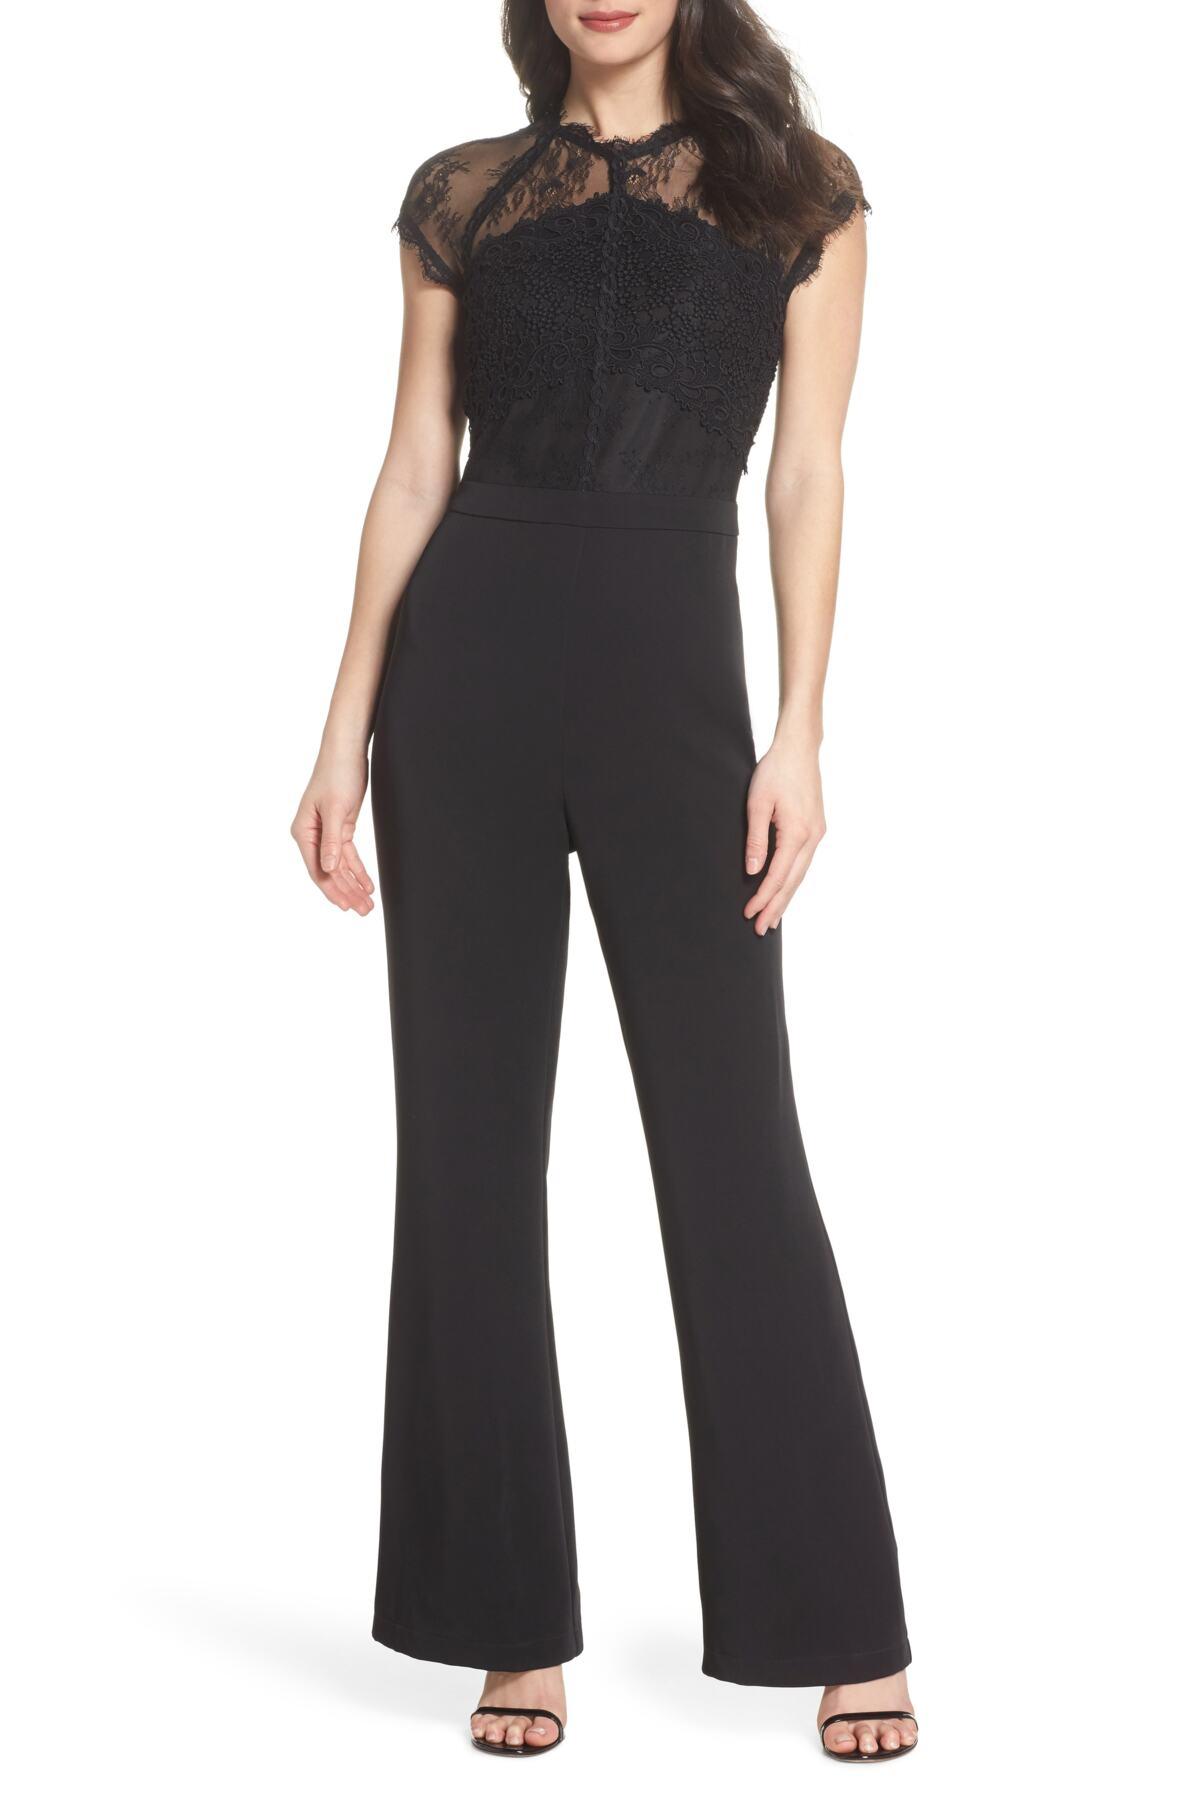 Harlyn Lace Illusion Top Jumpsuit in Black | Lyst